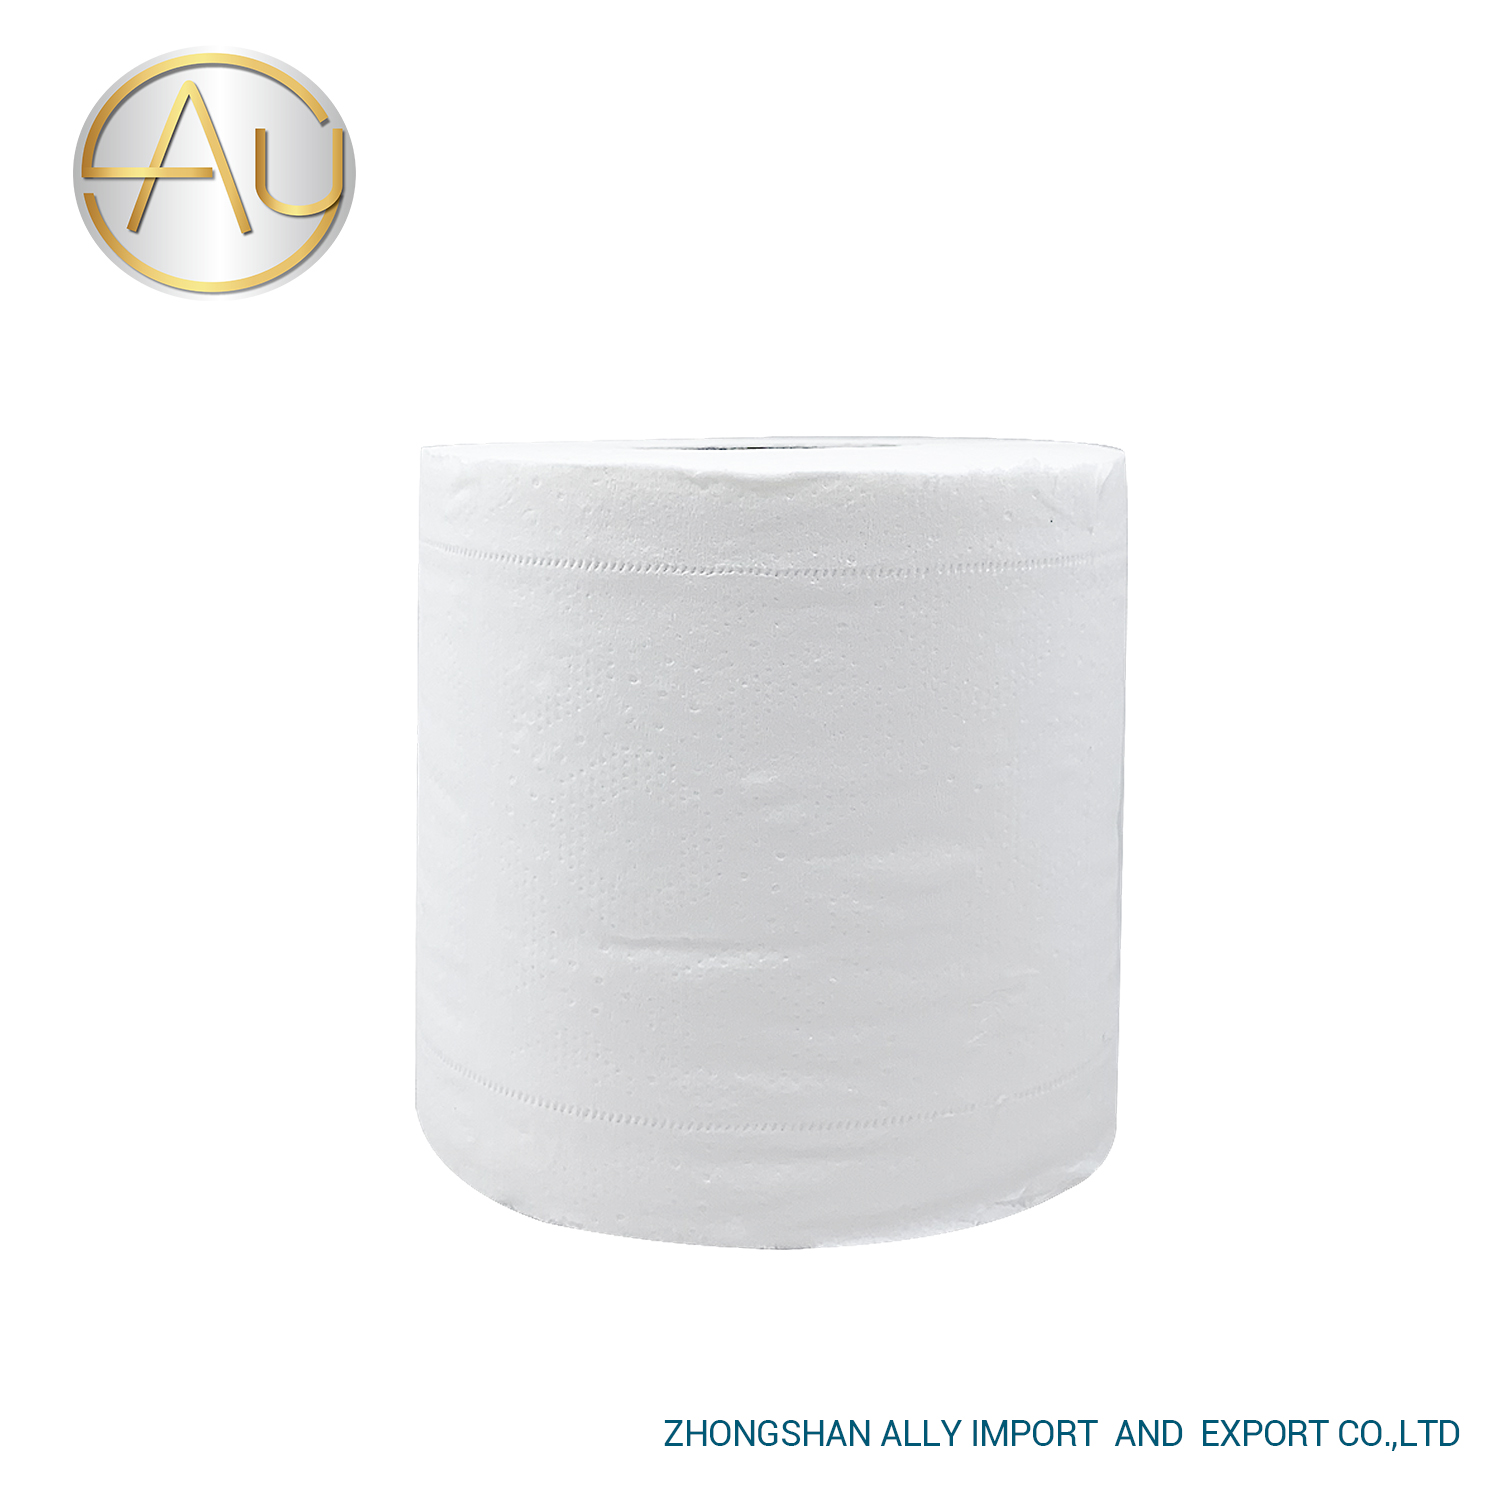 Factory Price 80x80mm Cash Register Receipt Paper Thermal Paper Roll for POS/ATM